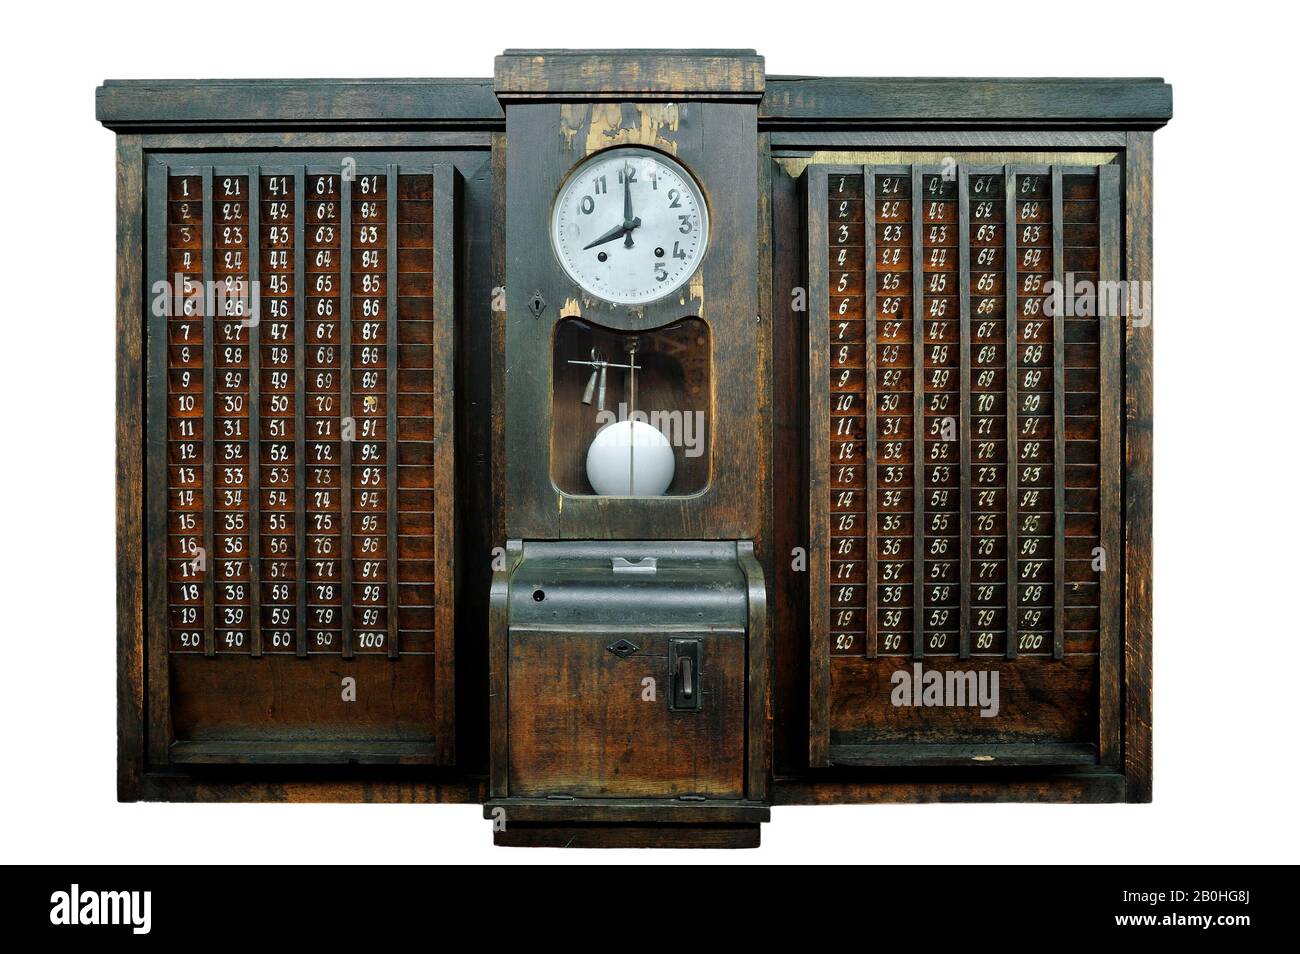 Antique wooden time clock / vintage punch clock, device that records start and end times for hourly employees against white background Stock Photo